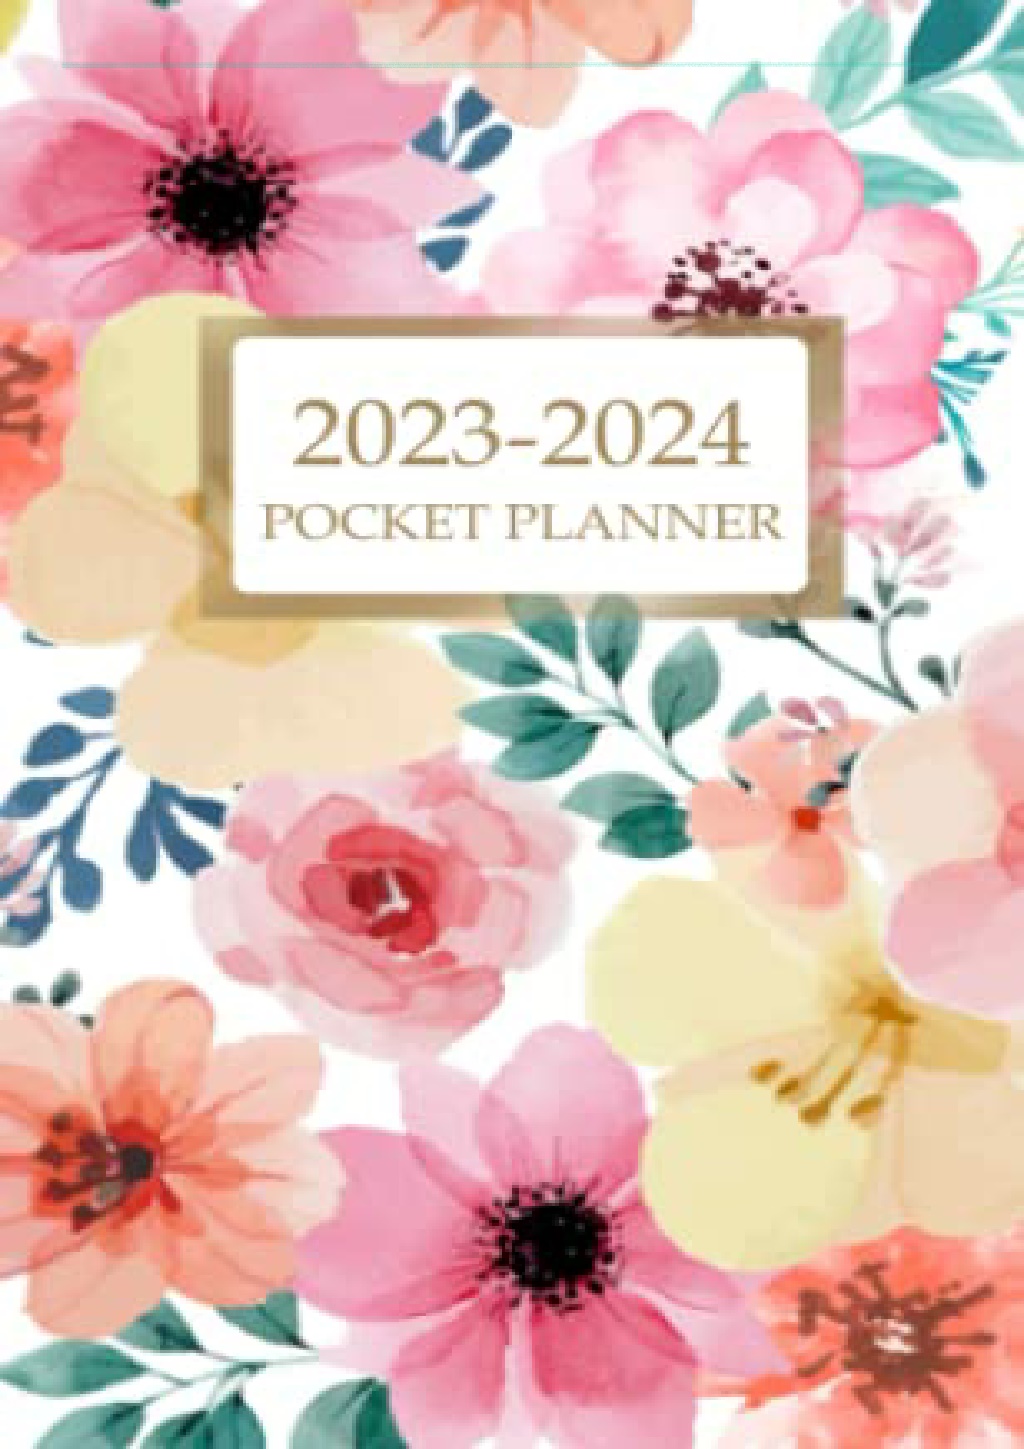 PPT PDF/READ/DOWNLOAD 20232024 Pocket Planner 2Year Monthly